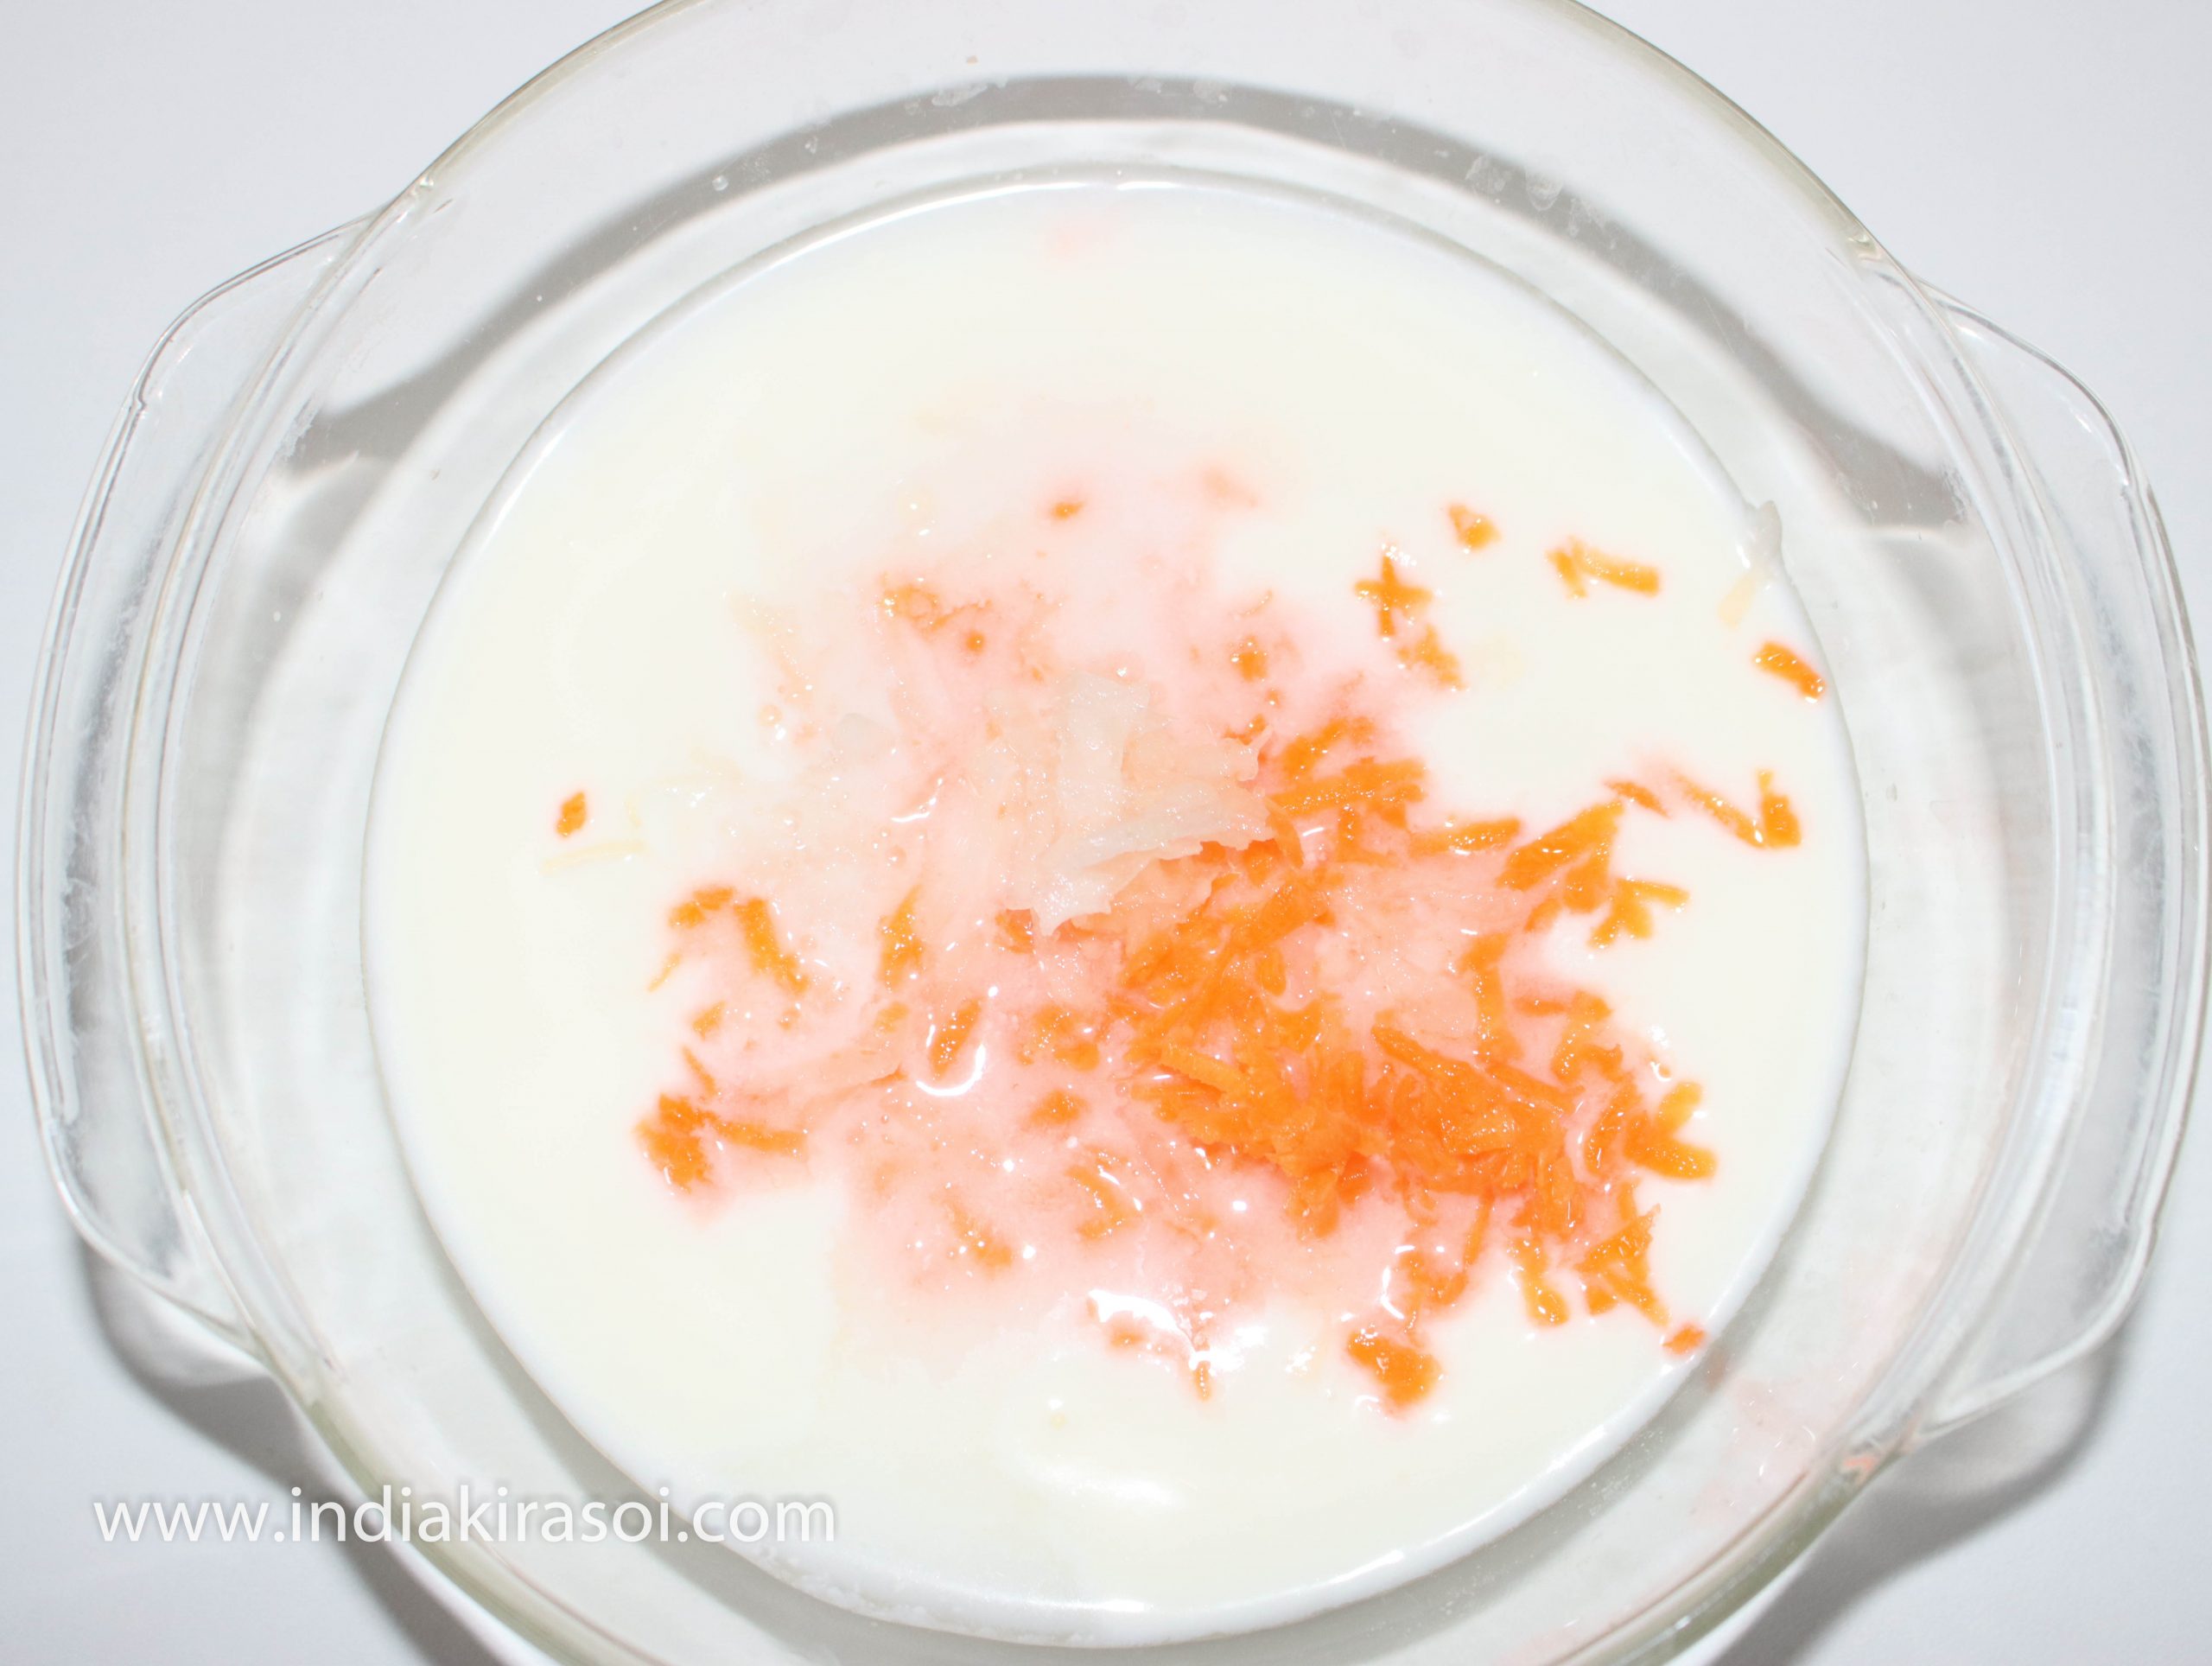 Beat the curd with spoon or beater. Add carrot and radish to the whipped curd/ yogurt.